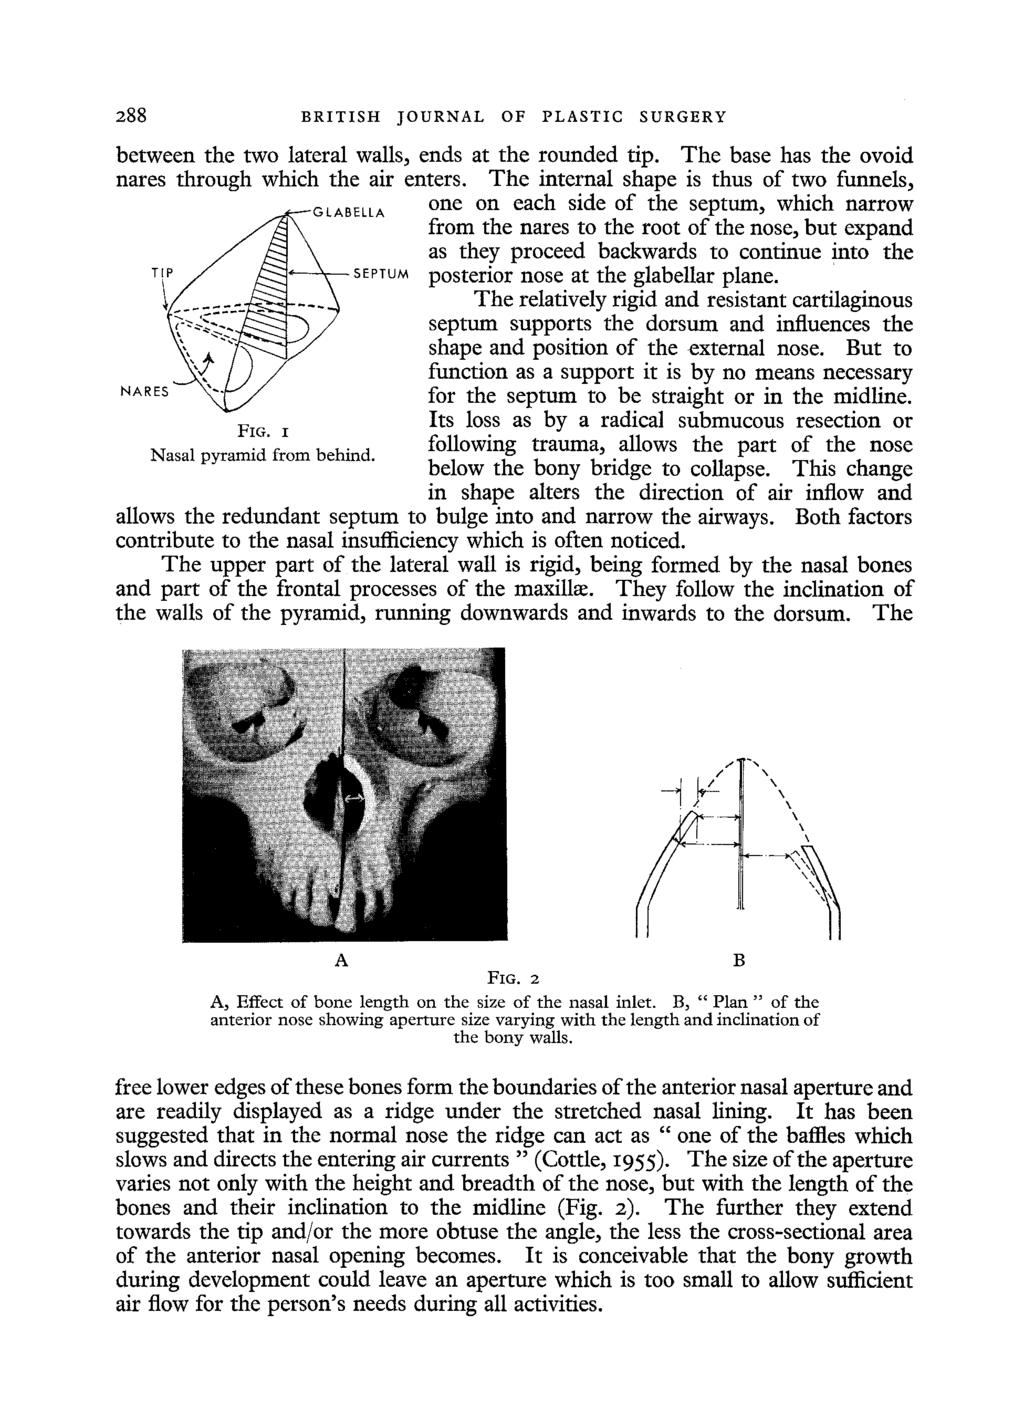 288 BRITISH JOURNAL OF PLASTIC SURGERY between the two lateral walls, ends at the rounded tip. The base has the ovoid nares through which the air enters.